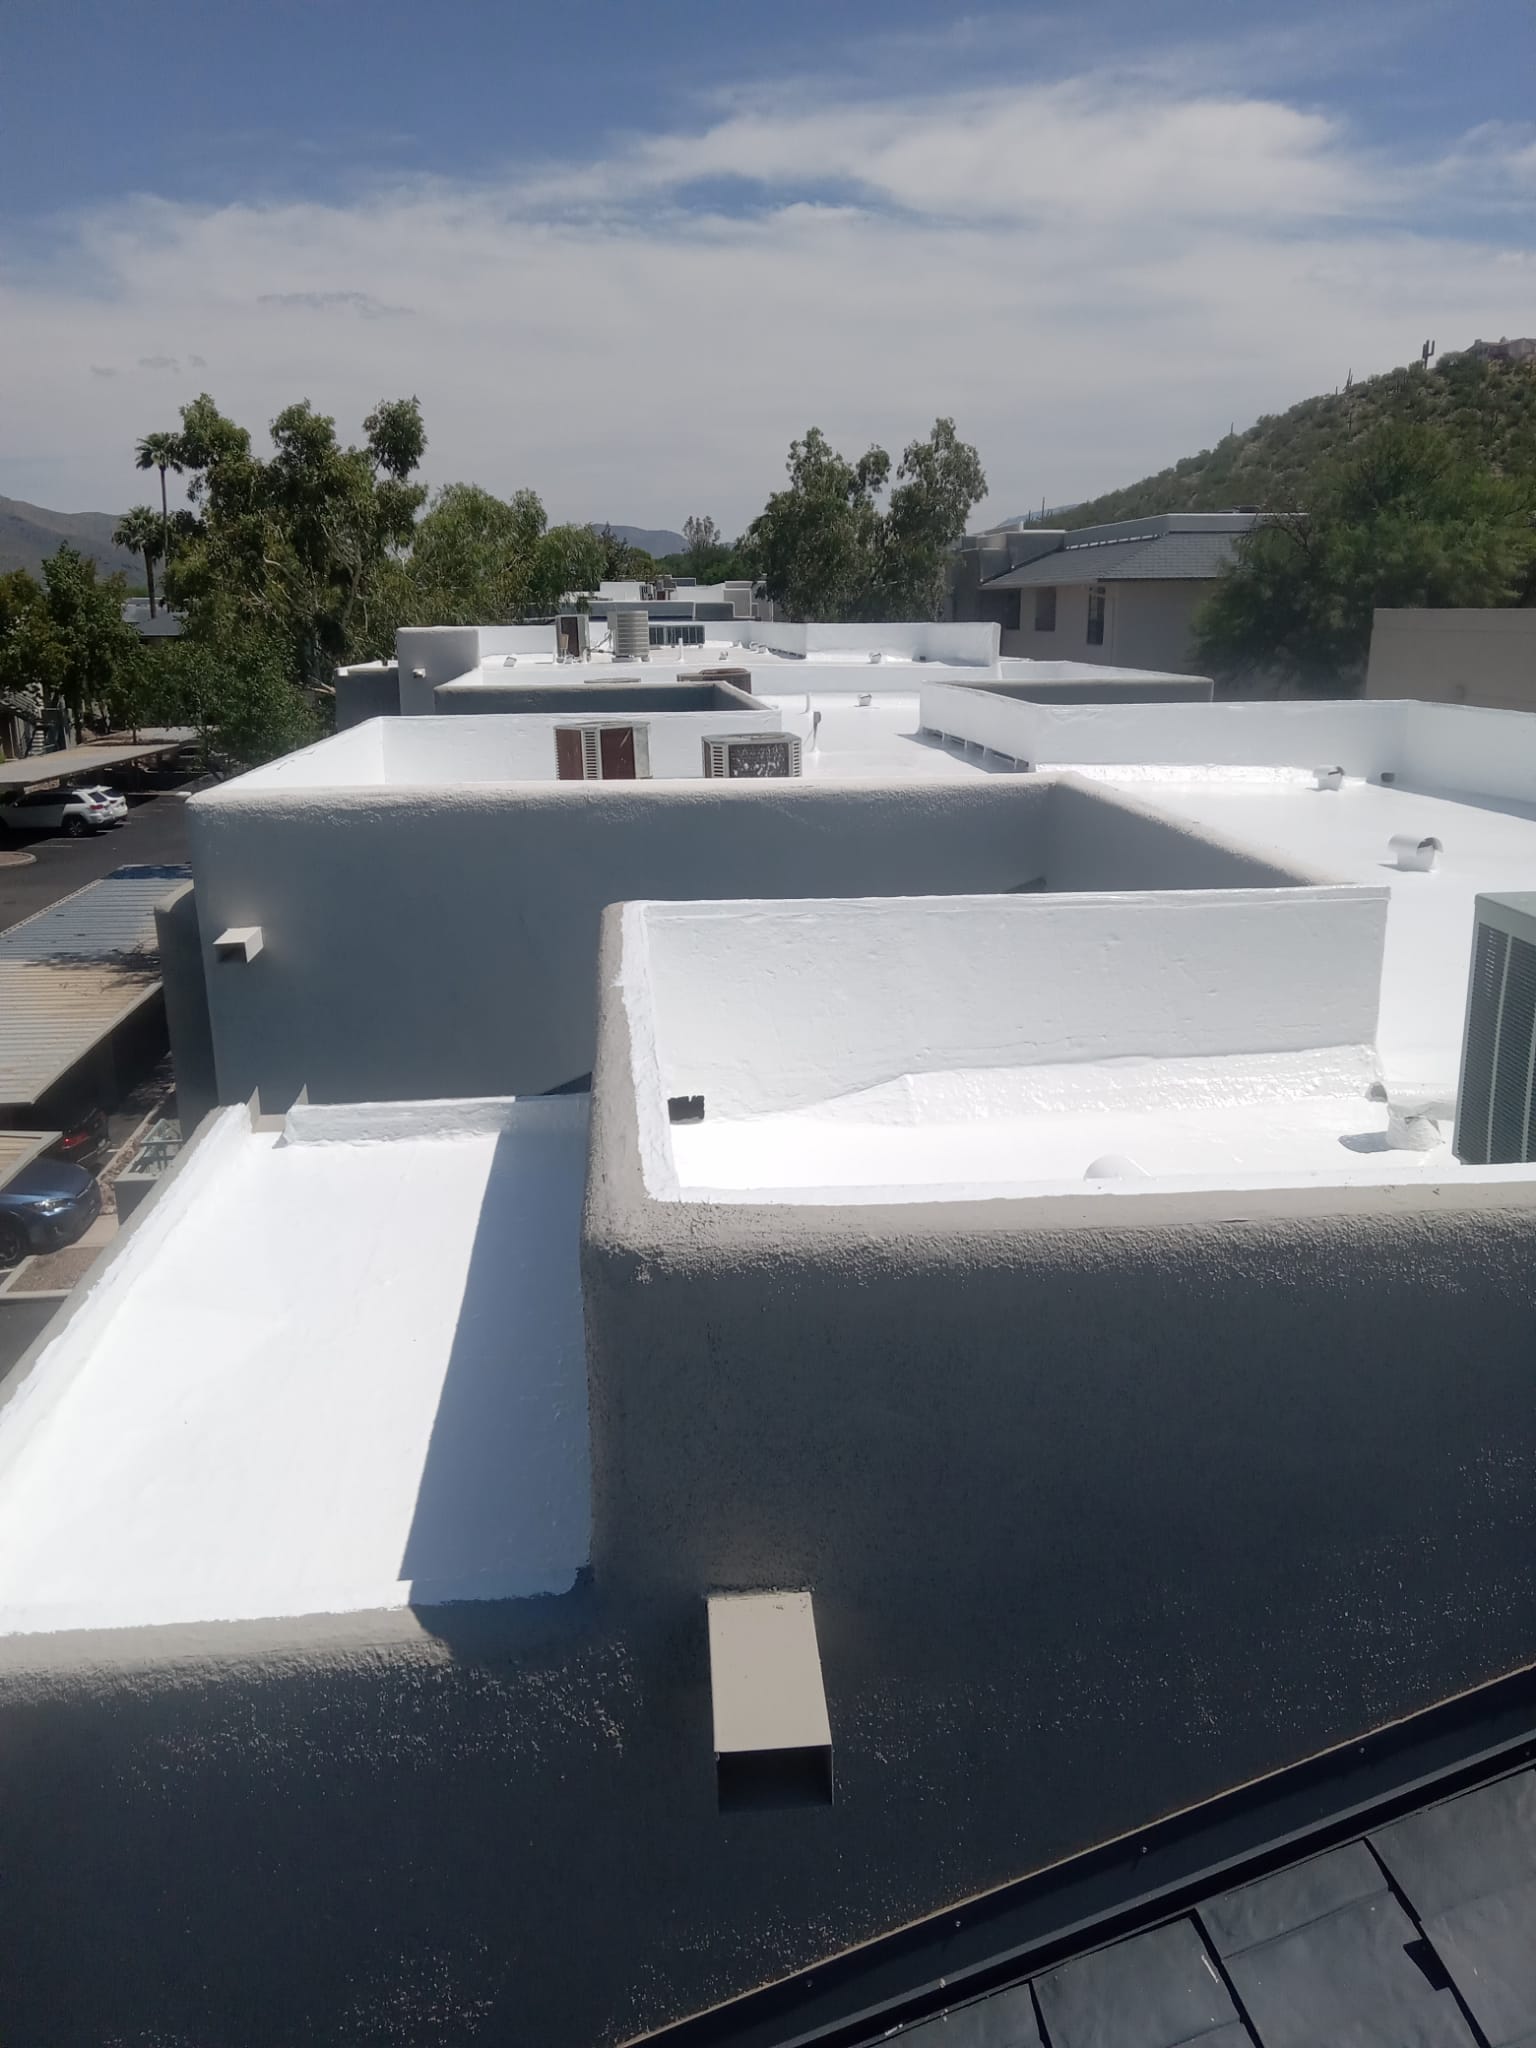 Multi-family residence in North Phoenix upgraded with spray foam roofing.